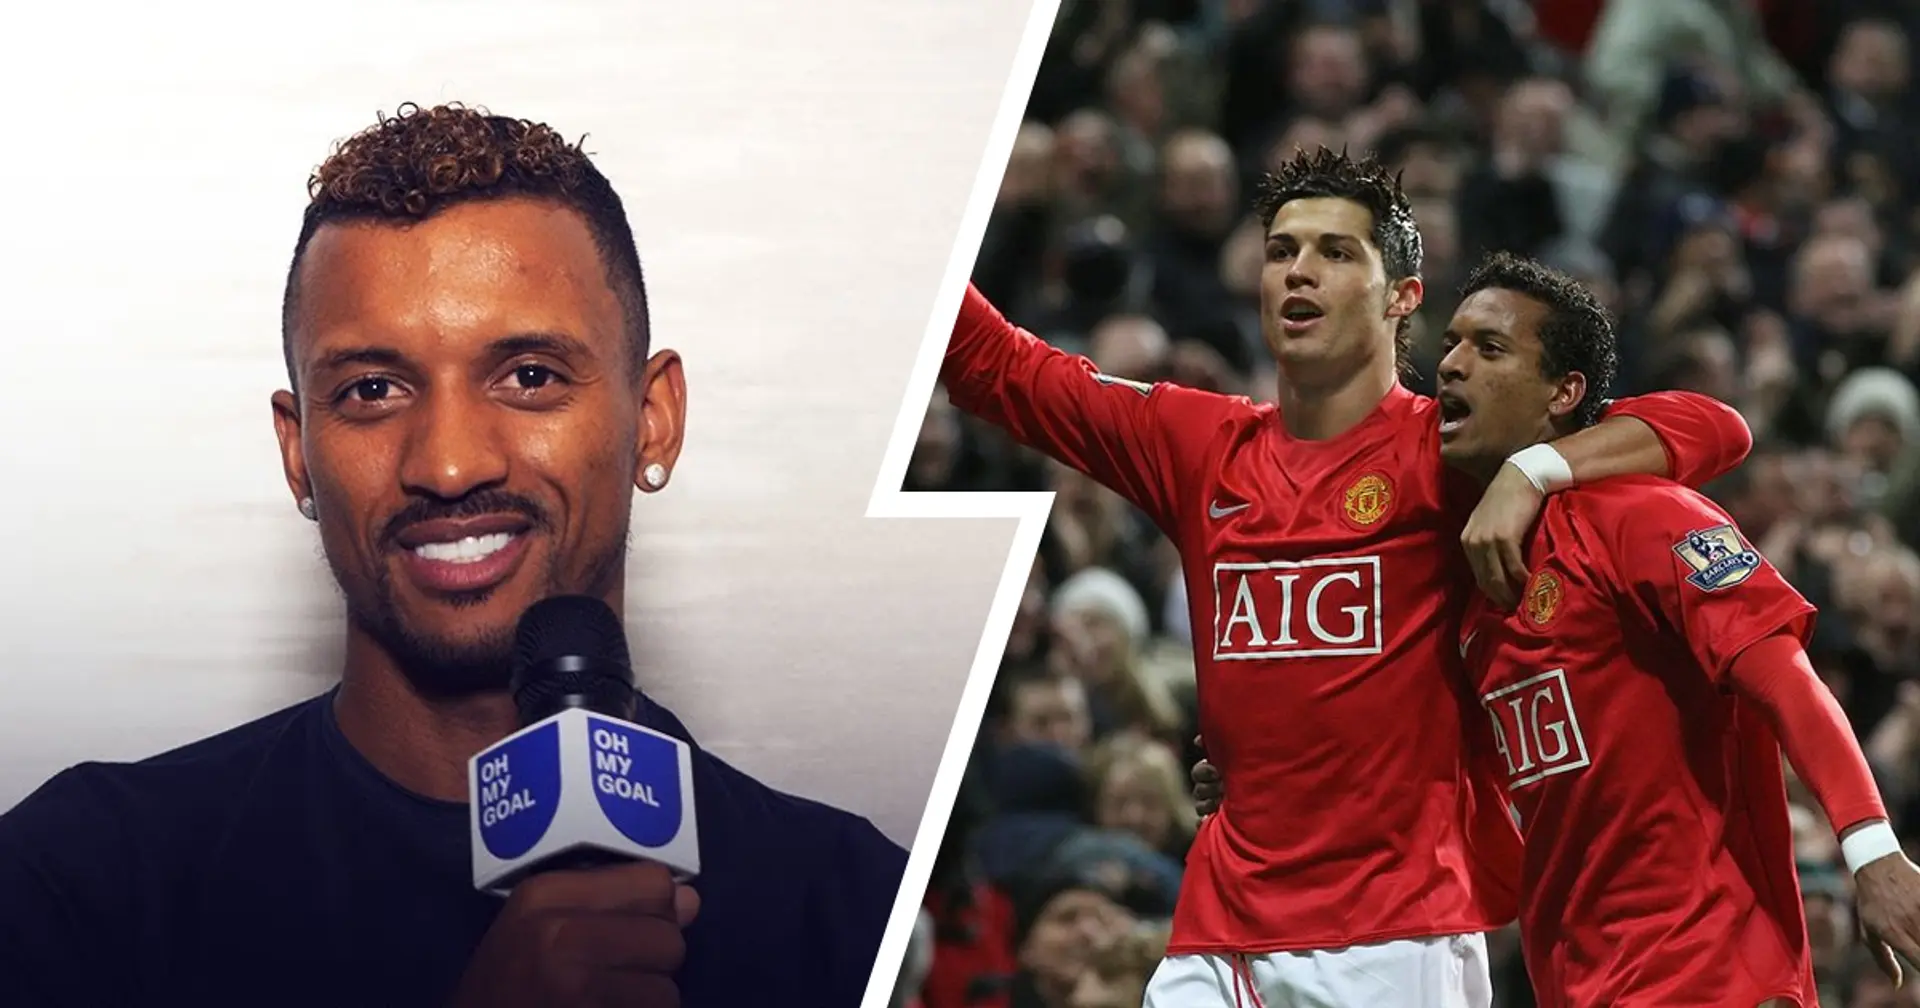 'We had become allergic to defeat': Nani reveals how living in Ronaldo's house formed his competitive nature